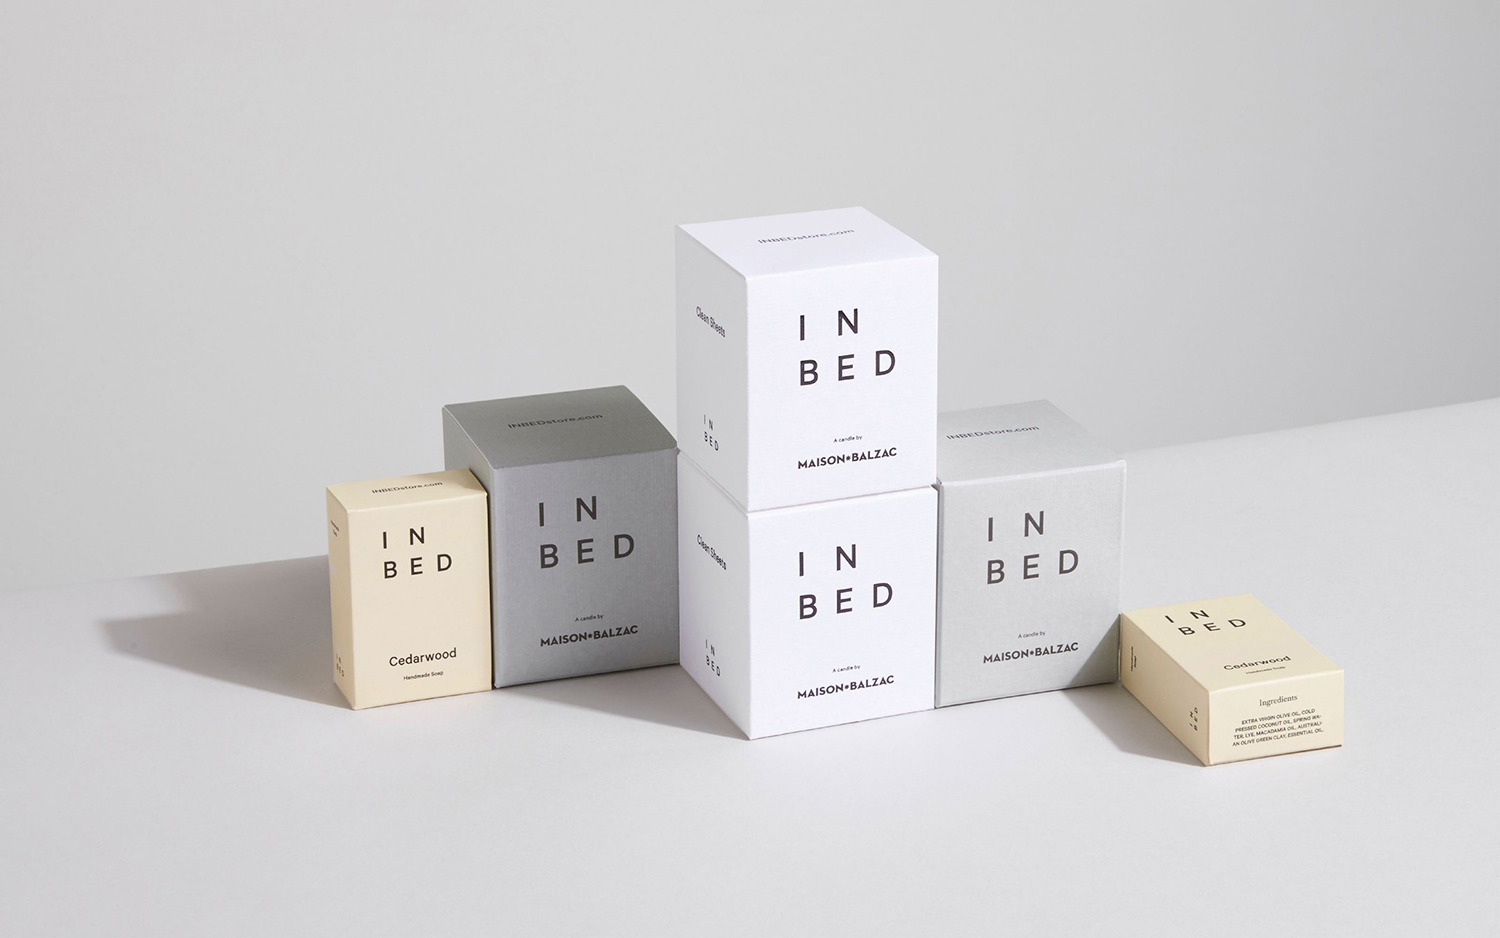 Visual identity, print and packaging for online homeware retailer In Bed designed by Moffitt.Moffitt